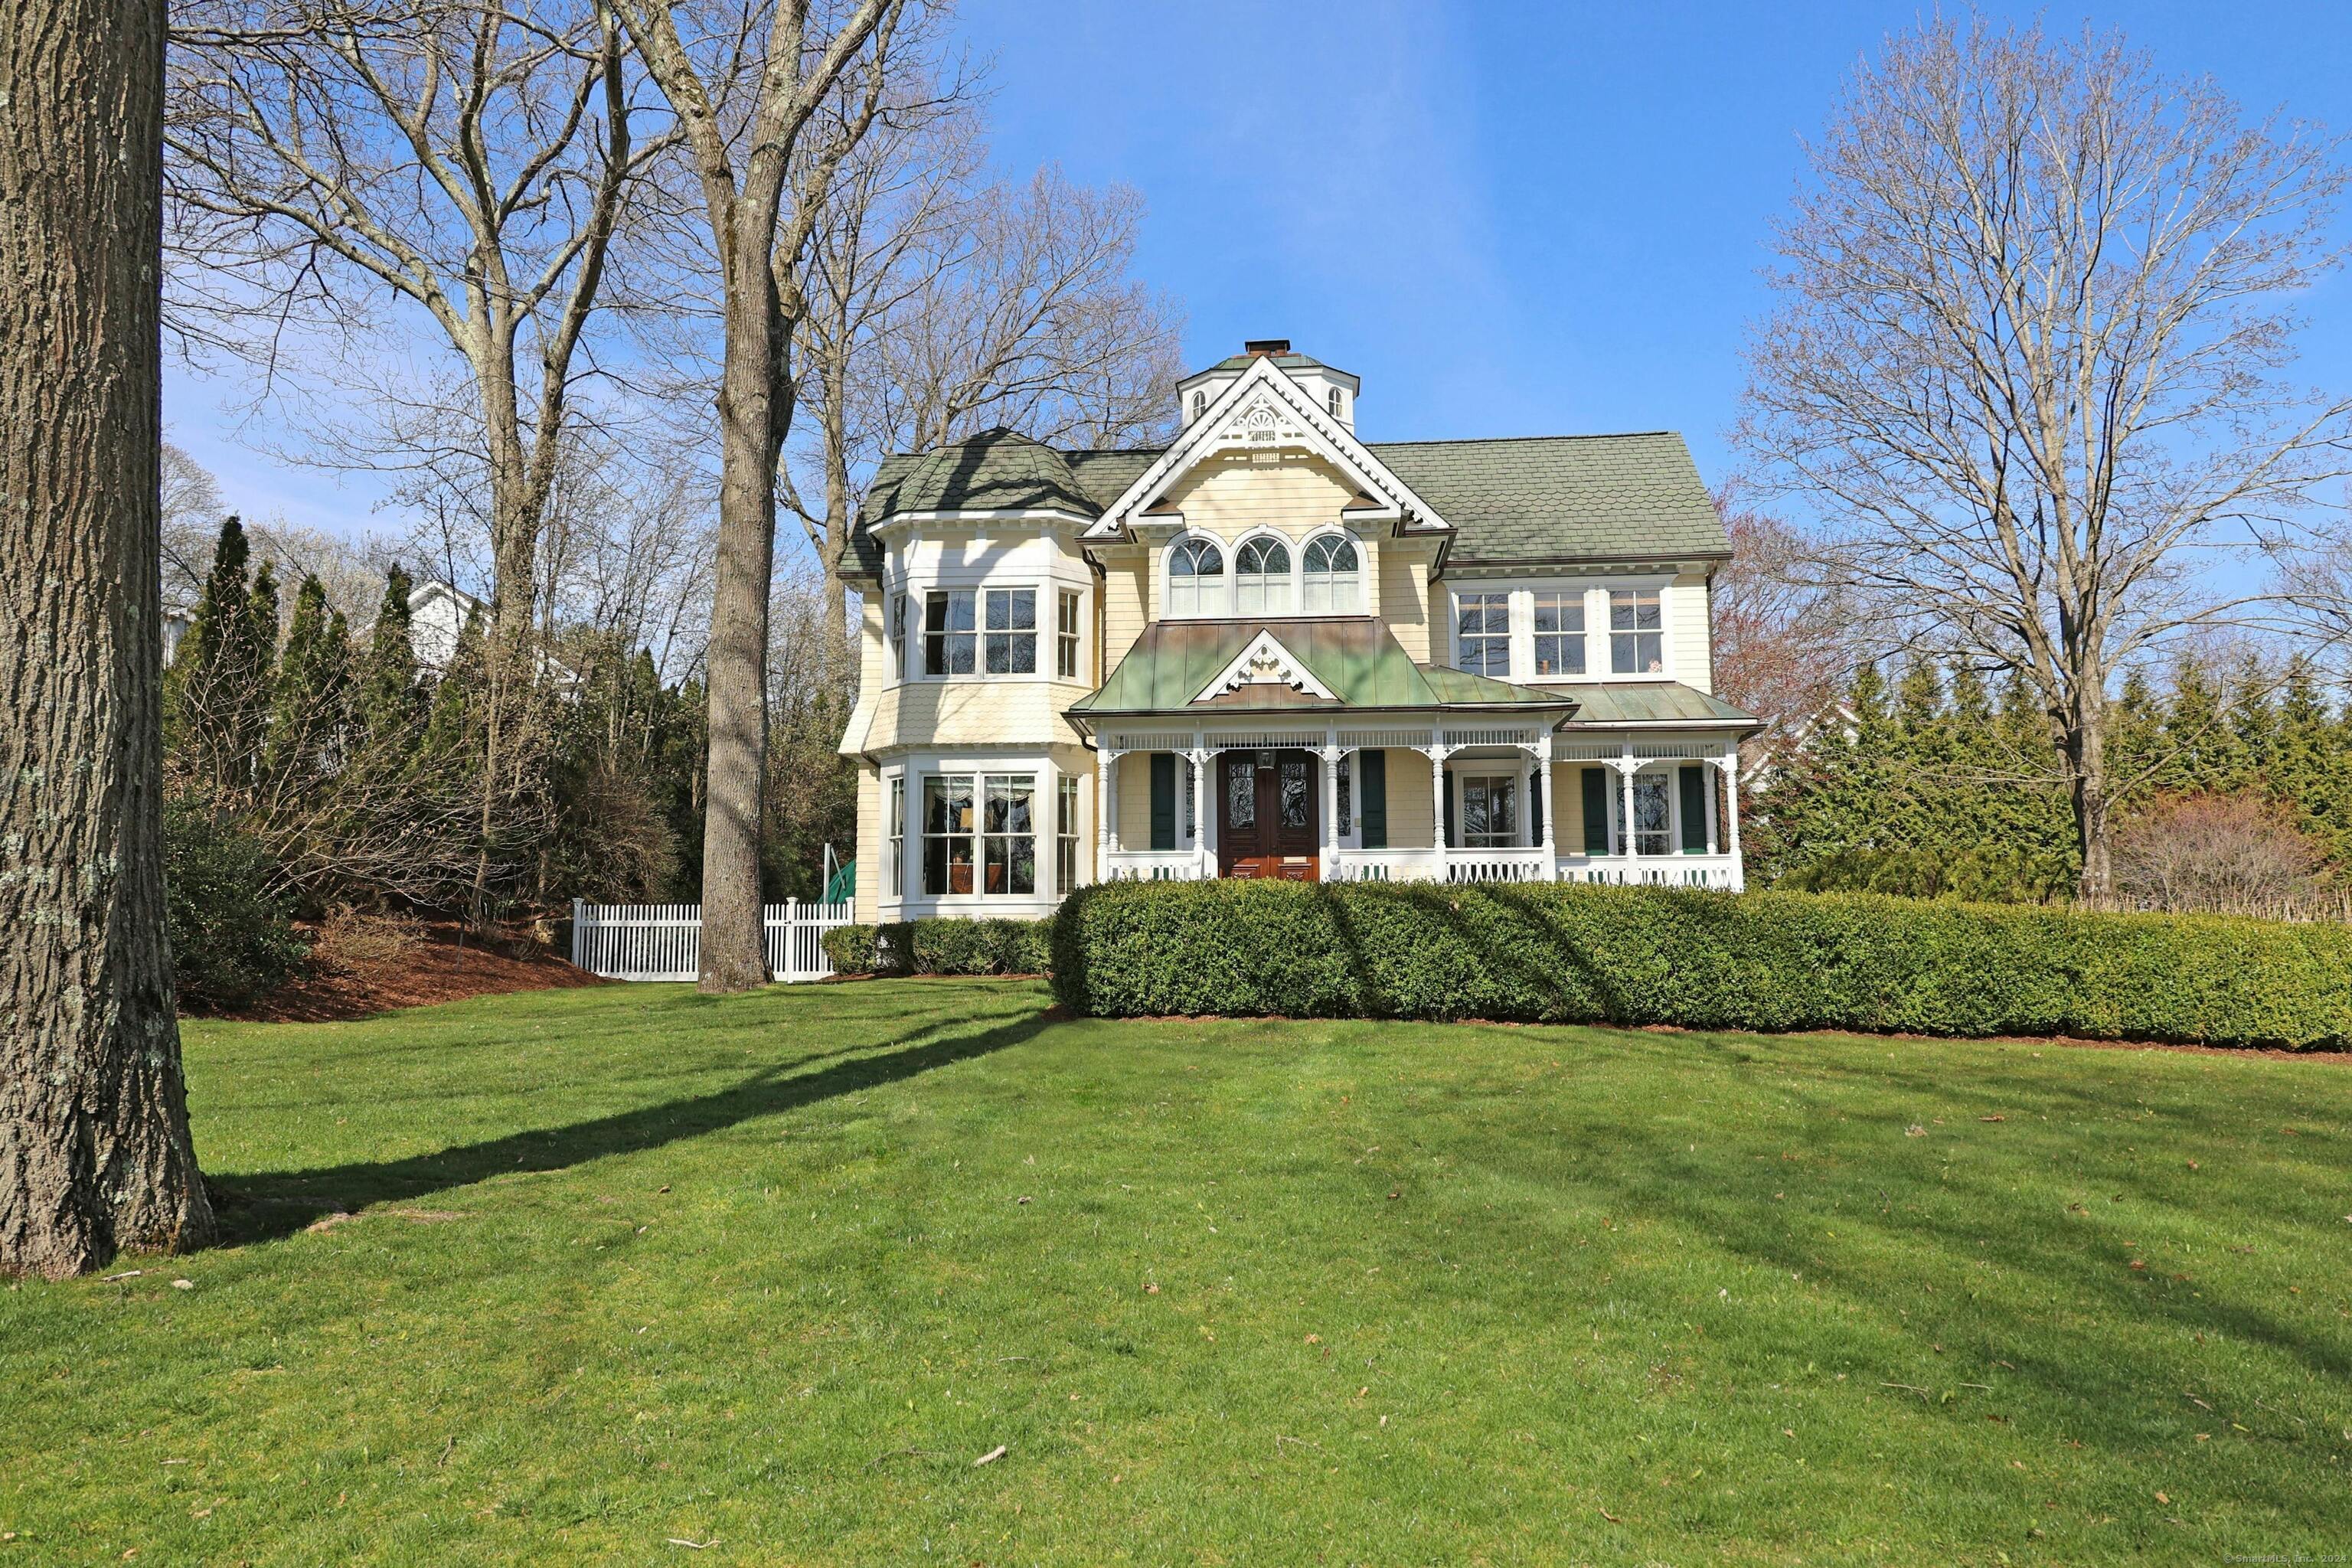 This stunning custom-built Victorian home is in a prime location, built by a renowned Westport builder. It boasts classic elegance and custom craftsmanship, with 9-foot ceilings and intricate carpentry moldings and architectural details all throughout. The kitchen is a dream for entertainers, opening up to a spacious family room with a cozy fireplace. The primary suite is a luxurious retreat, with two walk-in closets and its own gas fireplace. Additionally, the second floor offers three more en-suite bedrooms. The finished lower level offers a second laundry, office, half bath, and family room, all with plenty of storage space. Outside, a private patio with a built-in kitchen and grill area, as well as a pond with a waterfall, provides the perfect space for relaxation and entertaining guests. The two-car heated garage offers high ceilings and room for a lift.